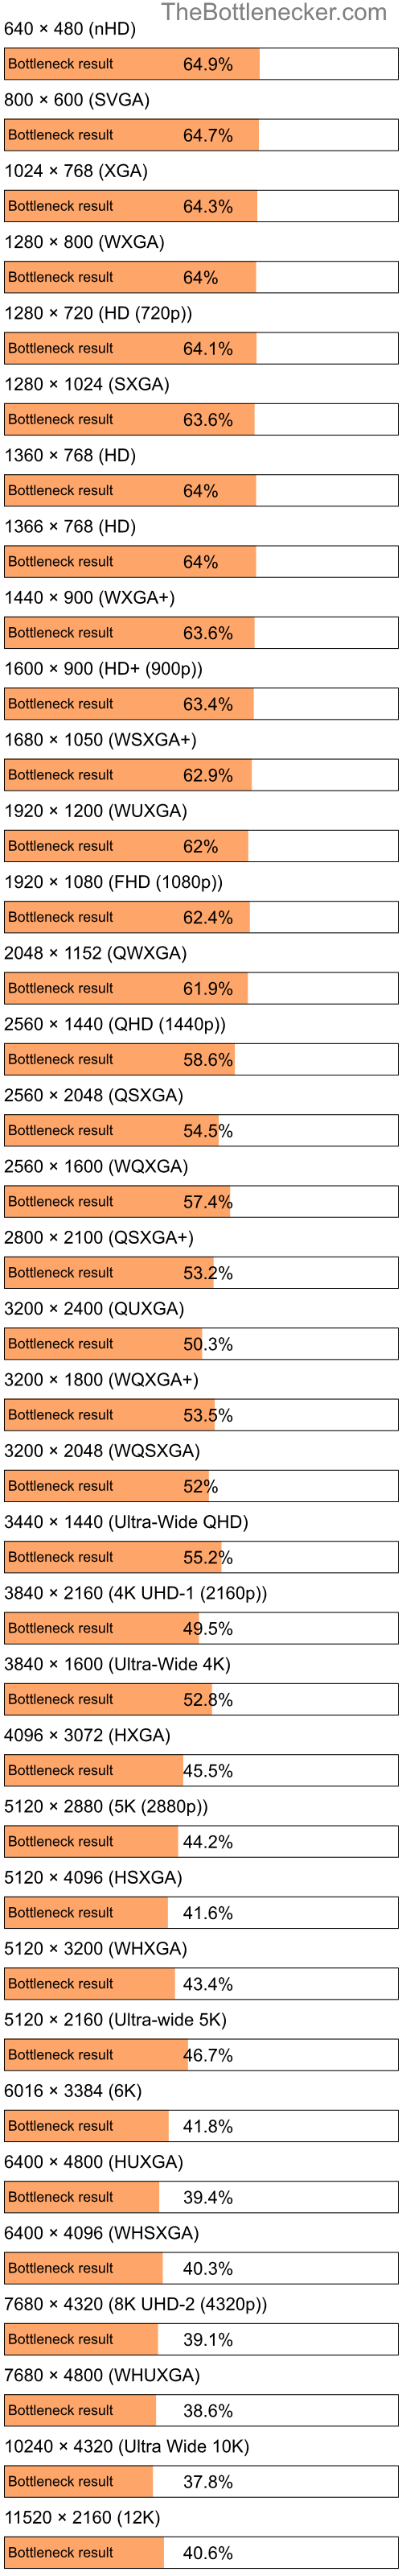 Bottleneck results by resolution for Intel Core2 Quad Q9500 and AMD Radeon RX 6800 in Graphic Card Intense Tasks